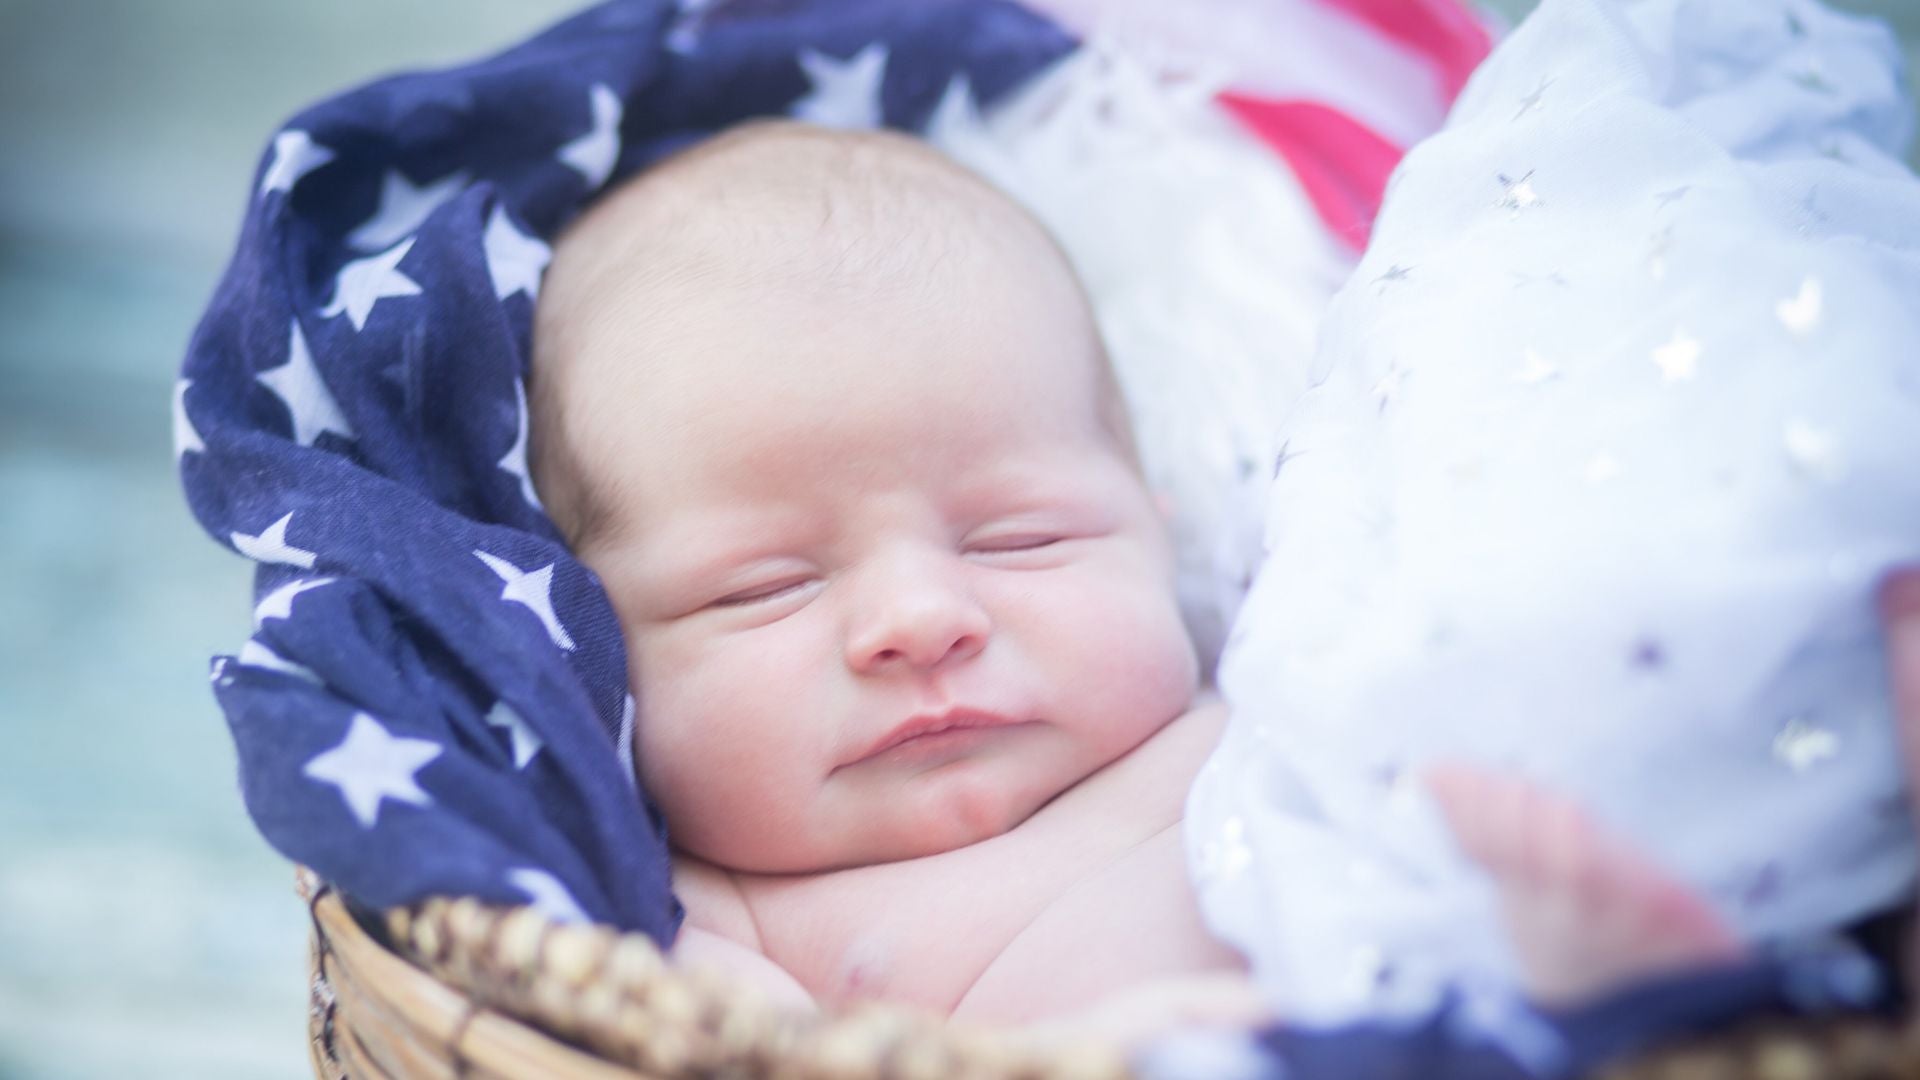 July Baby with US Flag